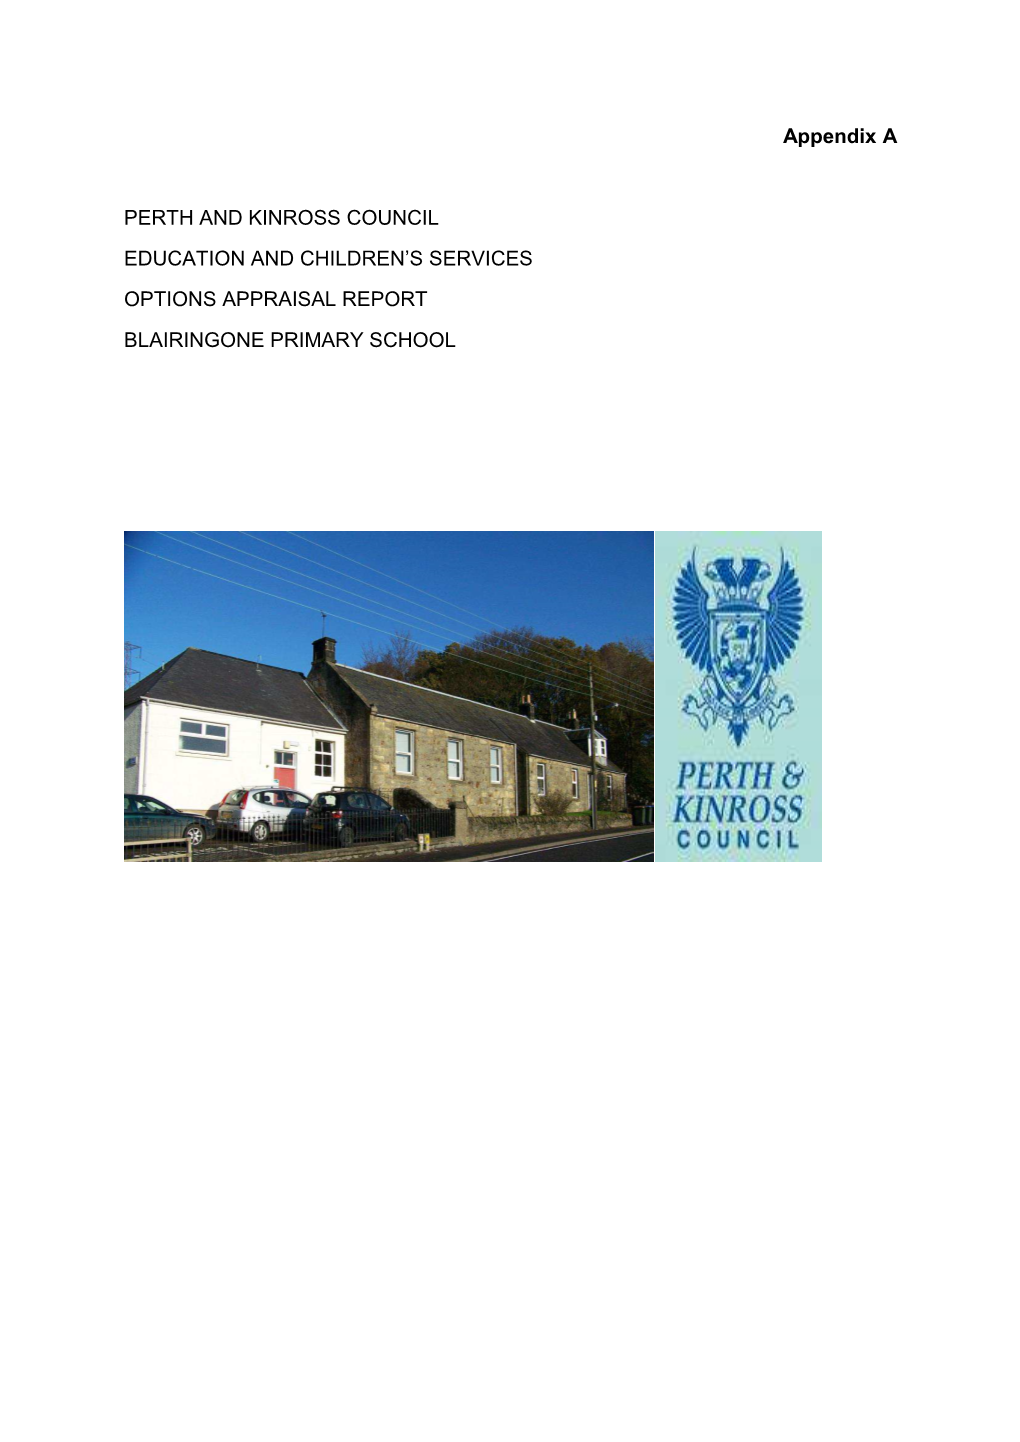 Appendix a PERTH and KINROSS COUNCIL EDUCATION AND